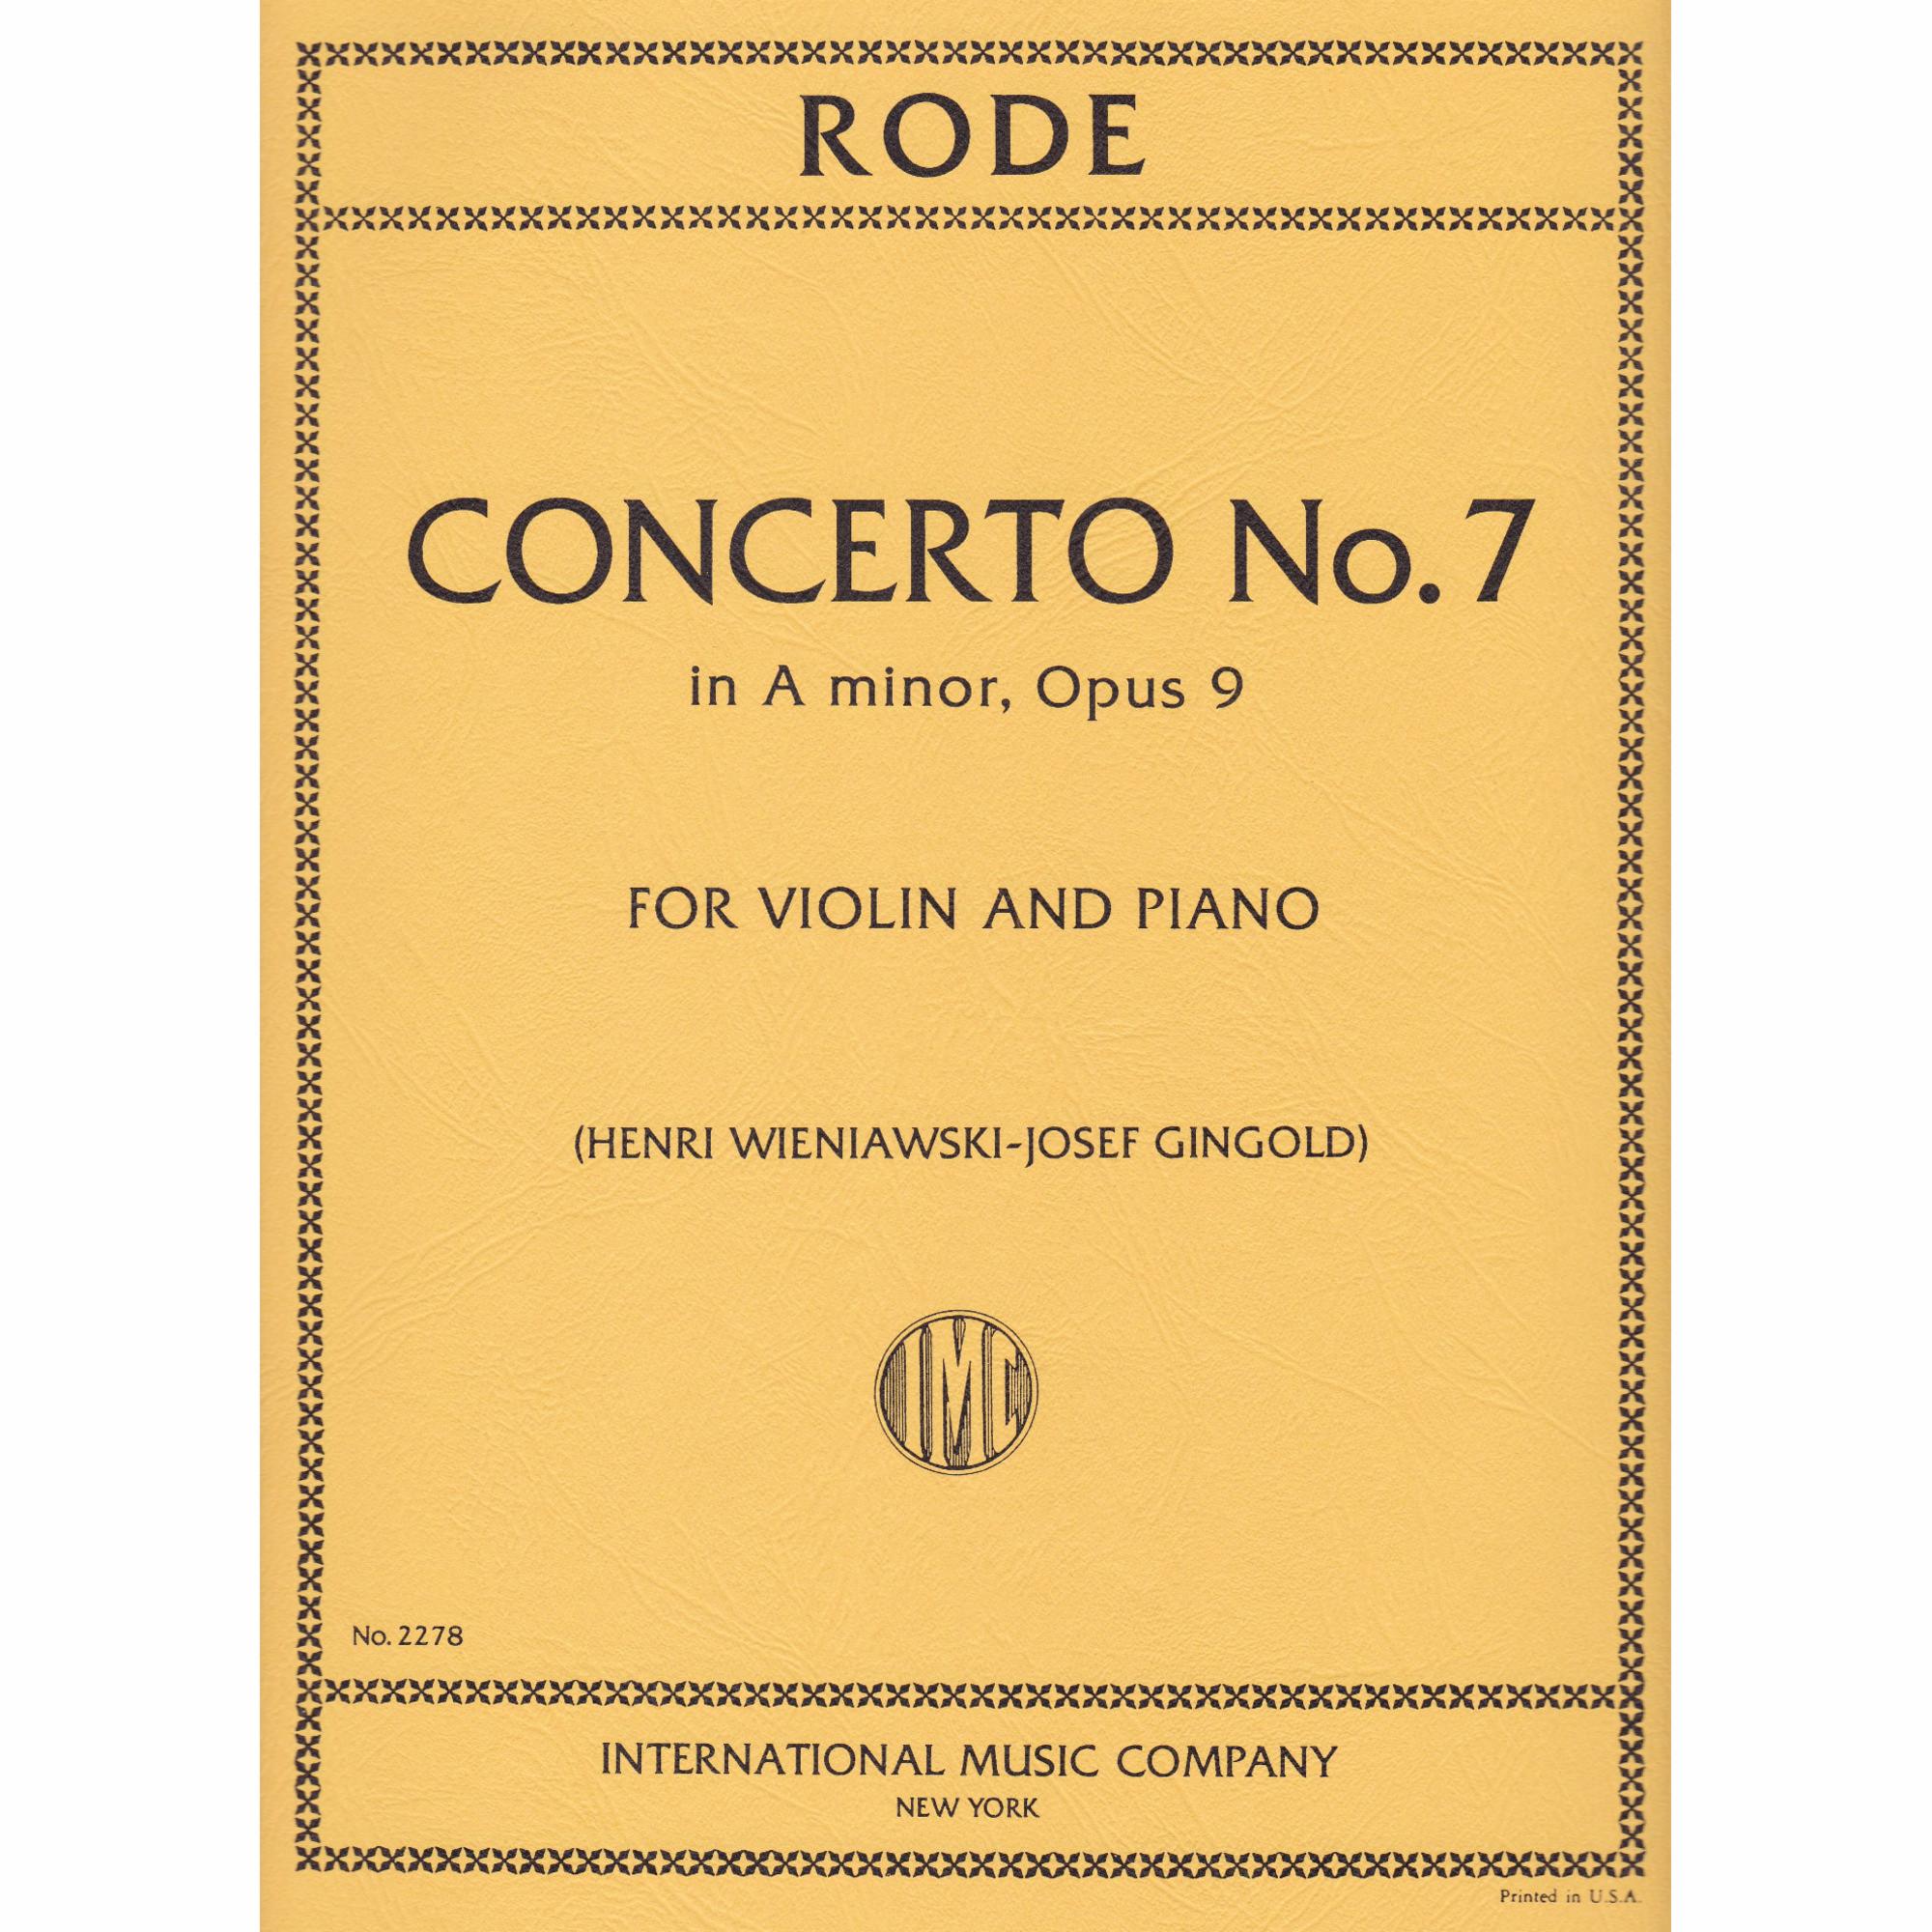 Rode -- Concerto No. 7 in A Minor, Op. 9 for Violin and Piano